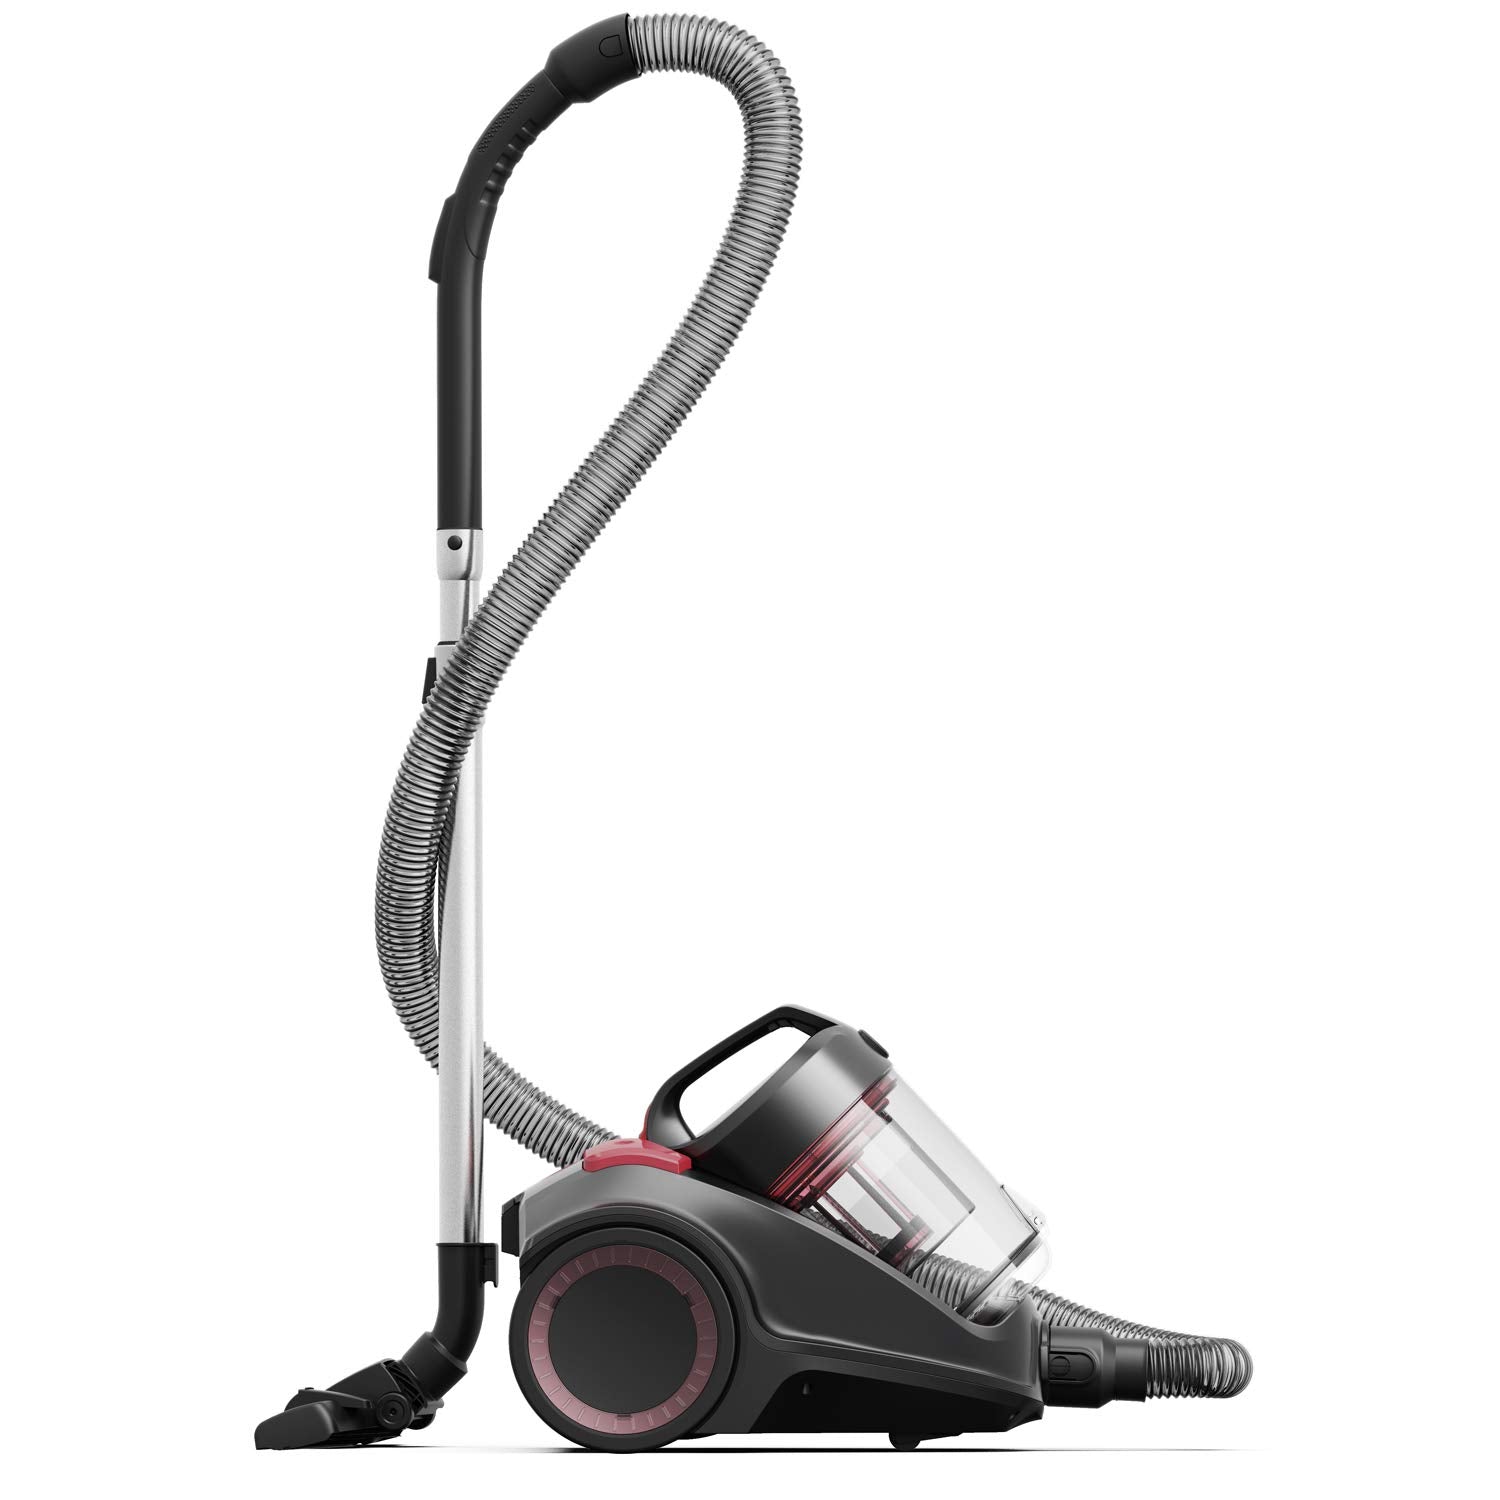 Hoover Power 6 Advanced Vaccum Cleaner Grey-Red 2200W